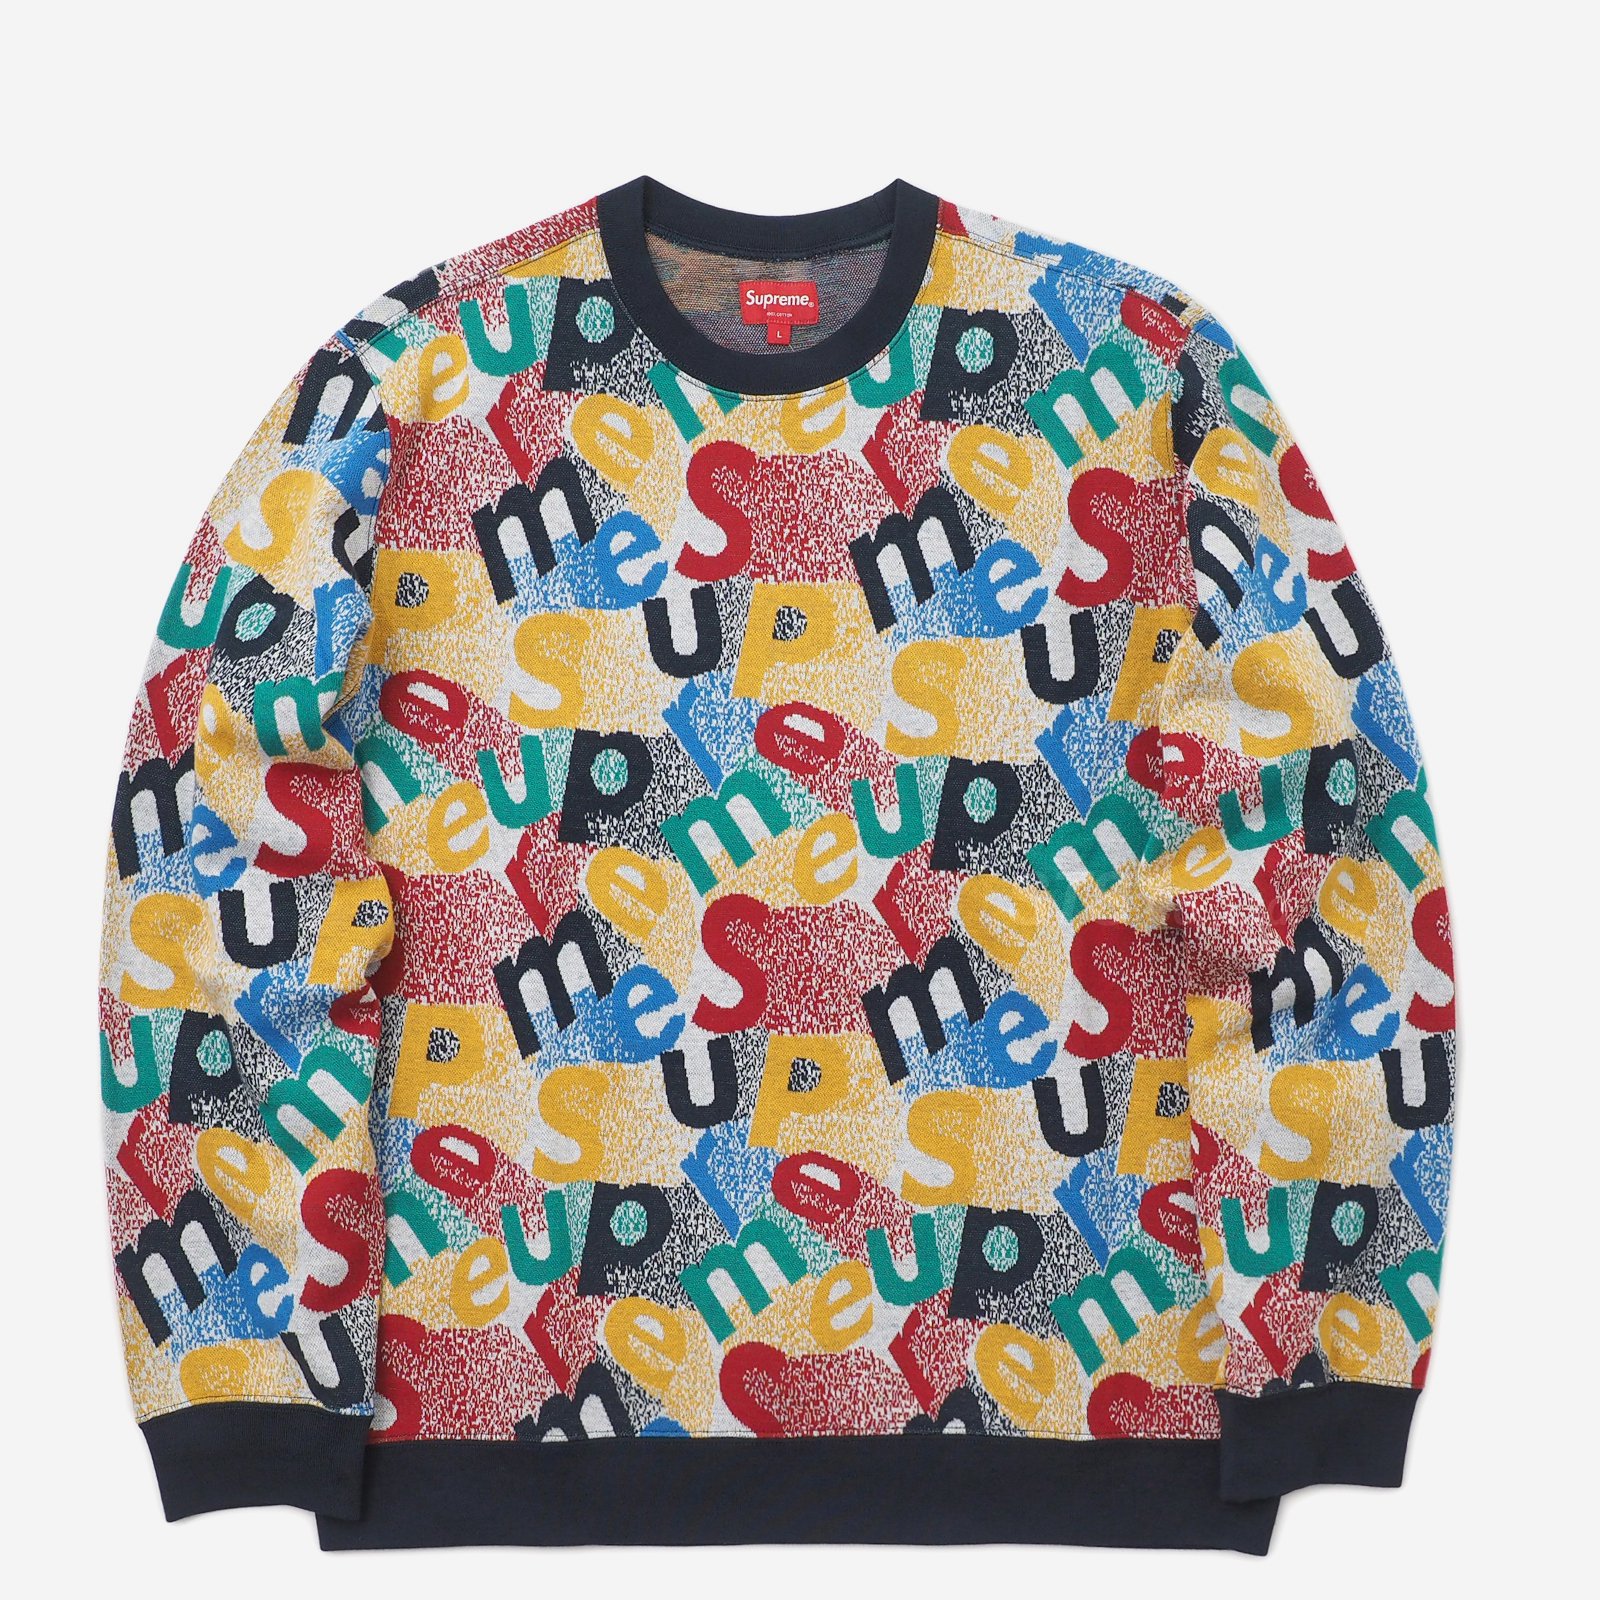 【L】19AW Supreme Scatter Text Crewneck